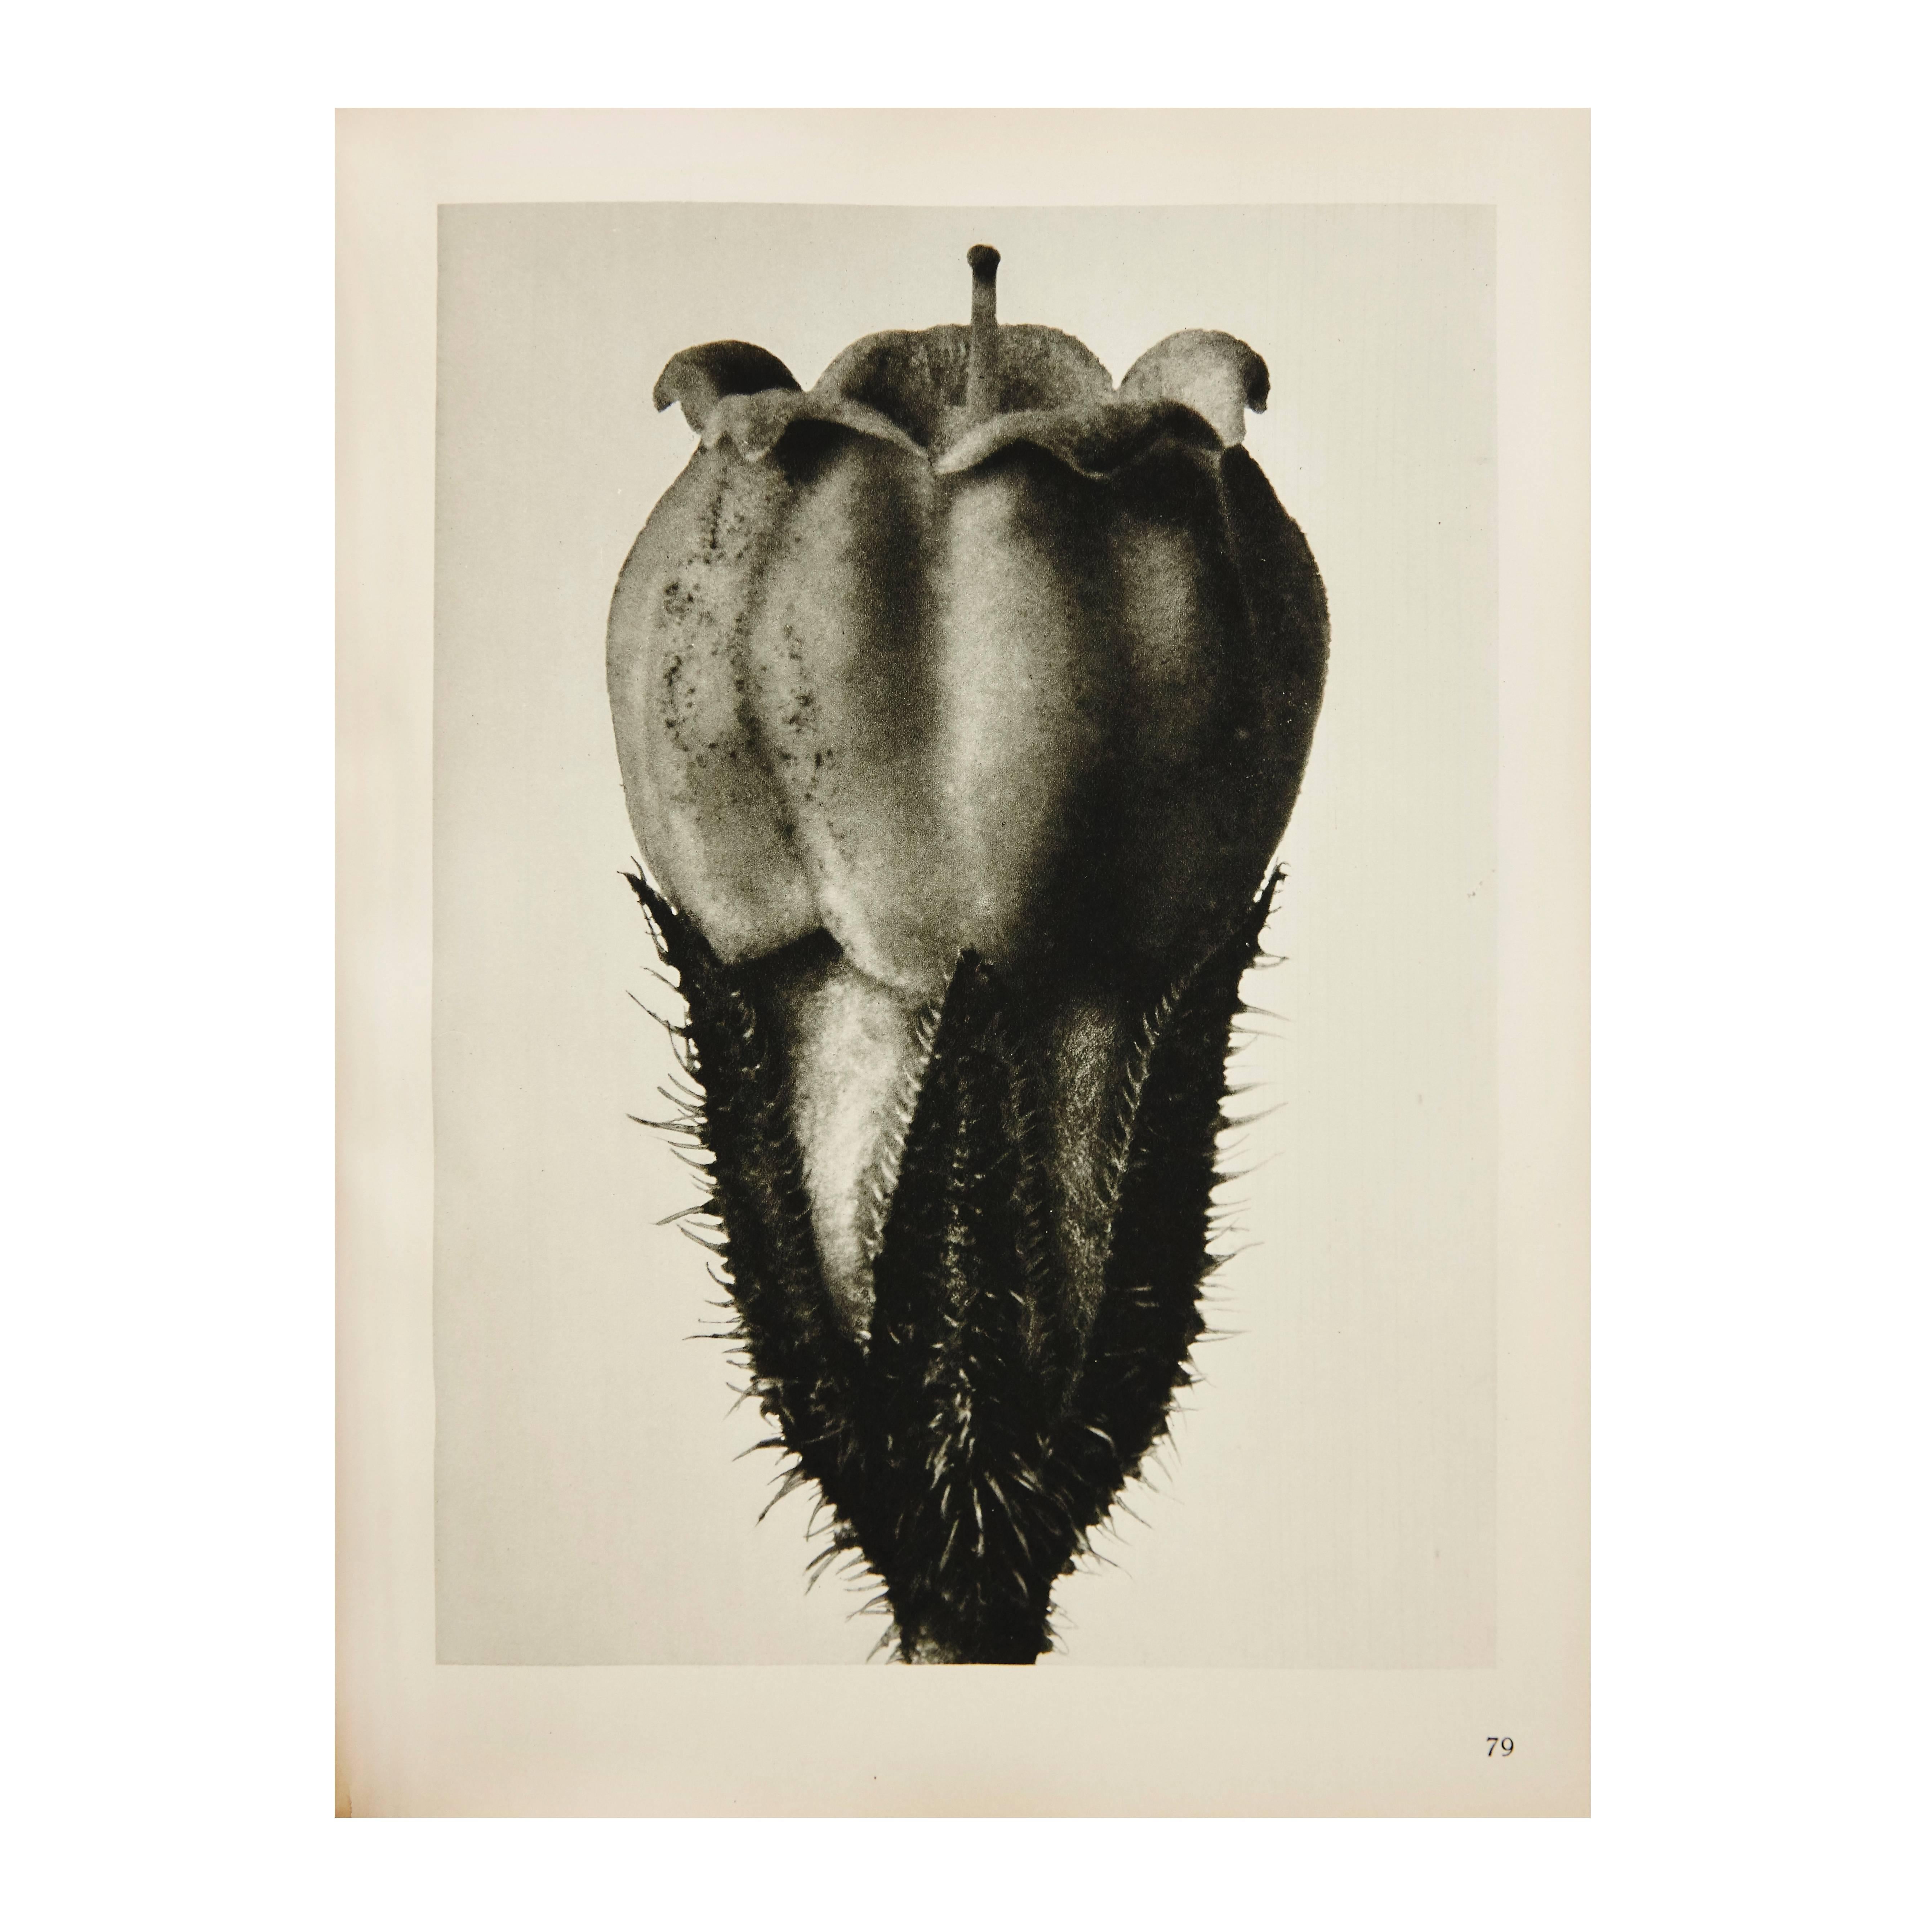 Photogravure from the First edition from Urformen Der Kunst in 1929.

In good original condition, with minor wear consistent with age and use, preserving a beautiful patina.

Karl Blossfeldt (June 13, 1865 – December 9, 1932) was a German